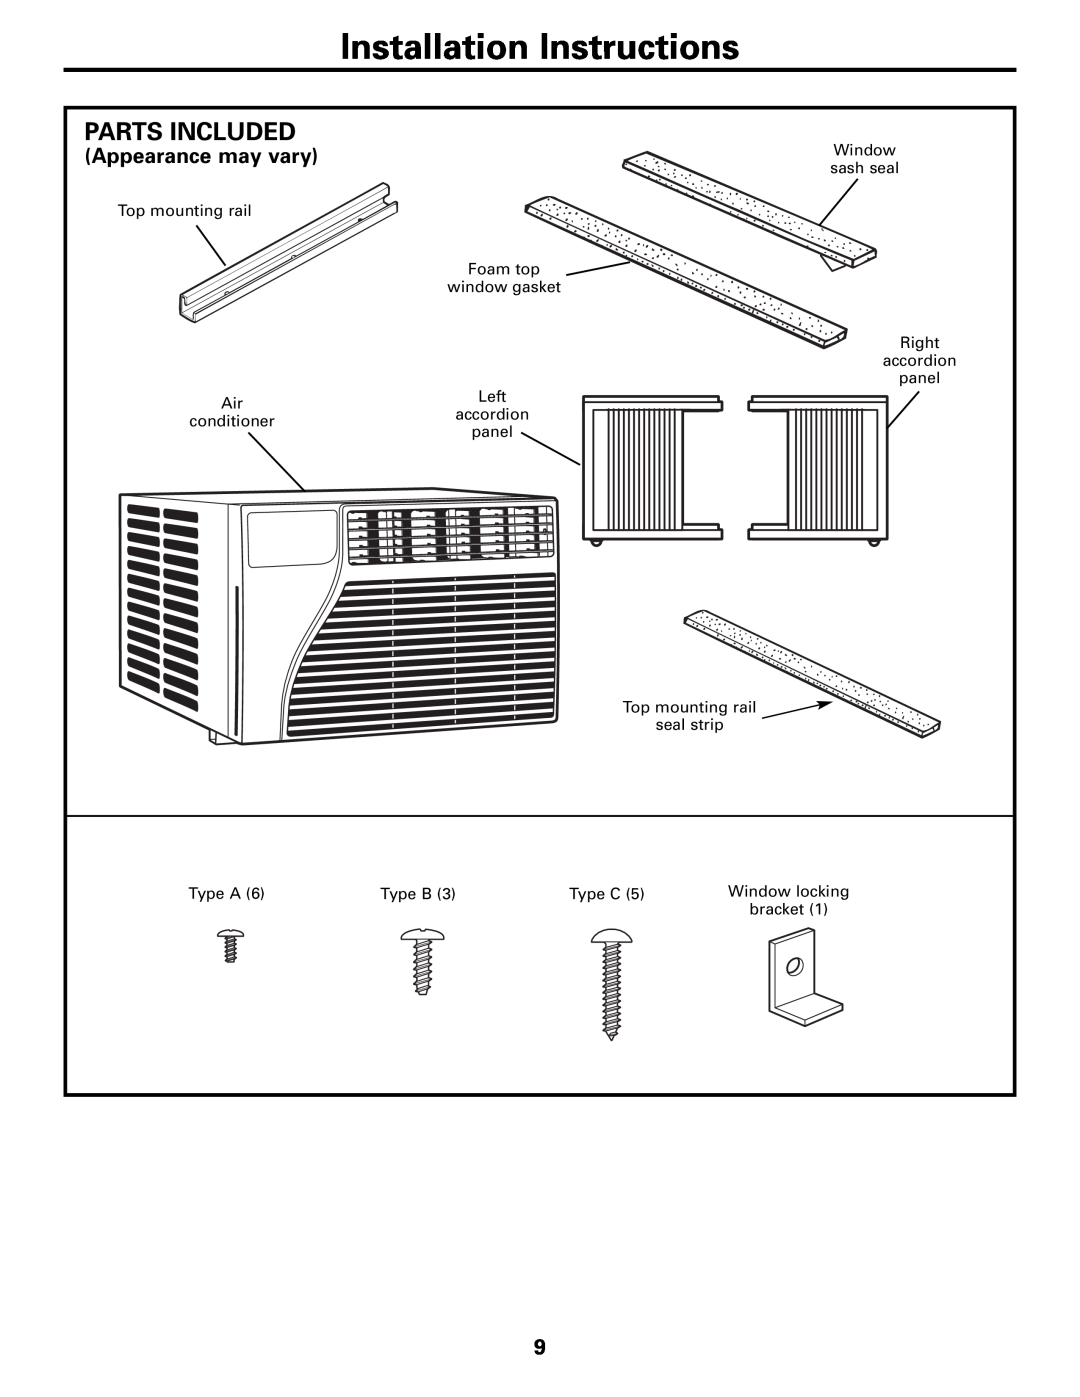 GE AEQ05 installation instructions Installation Instructions, Parts Included, Appearance may vary 